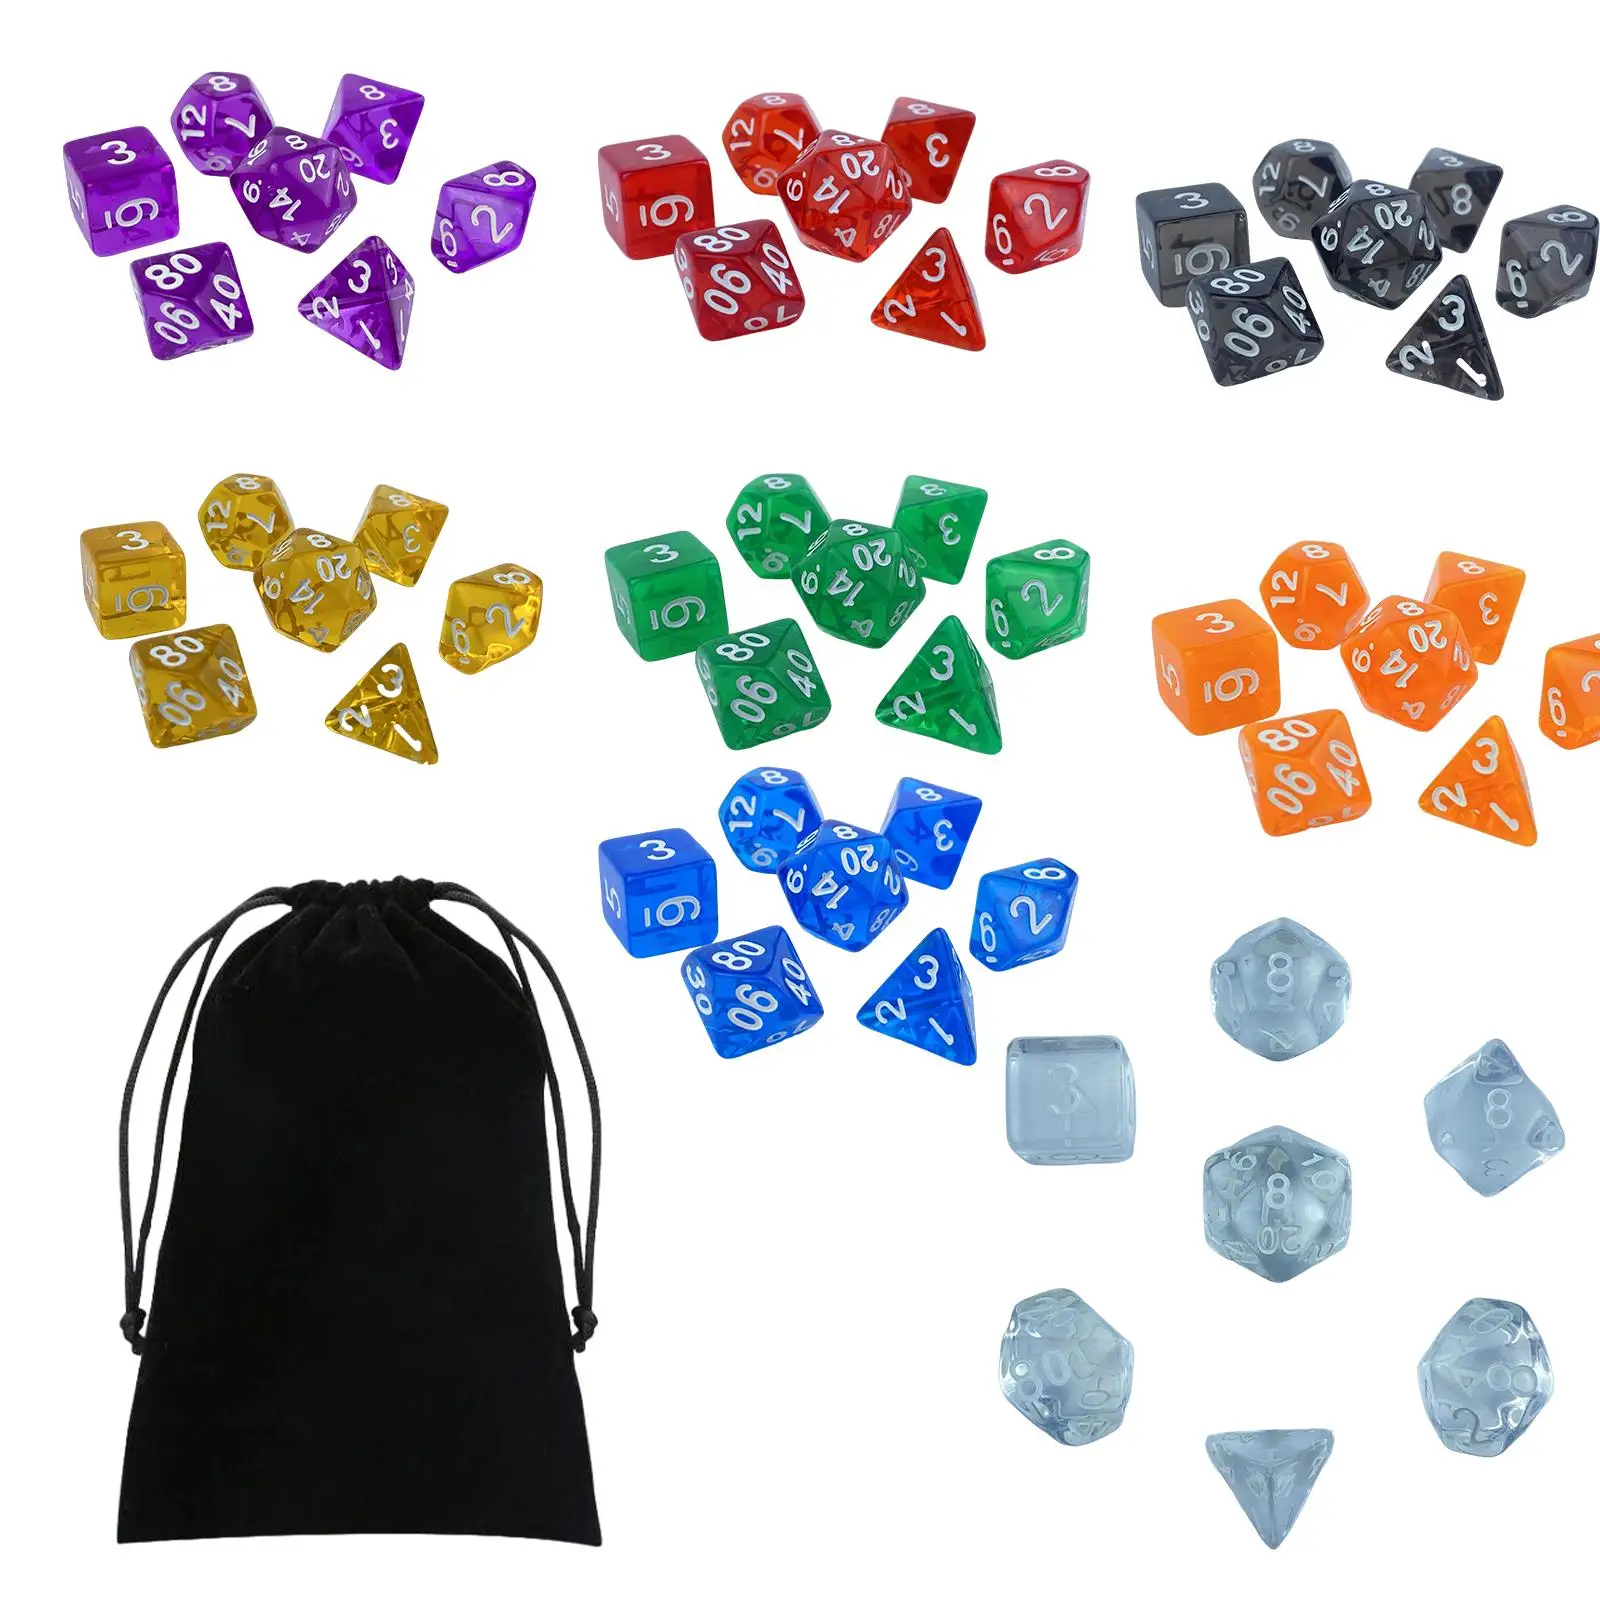 Colorful Polyhedral Dice Set - 56 Pieces for Board Games and RPG